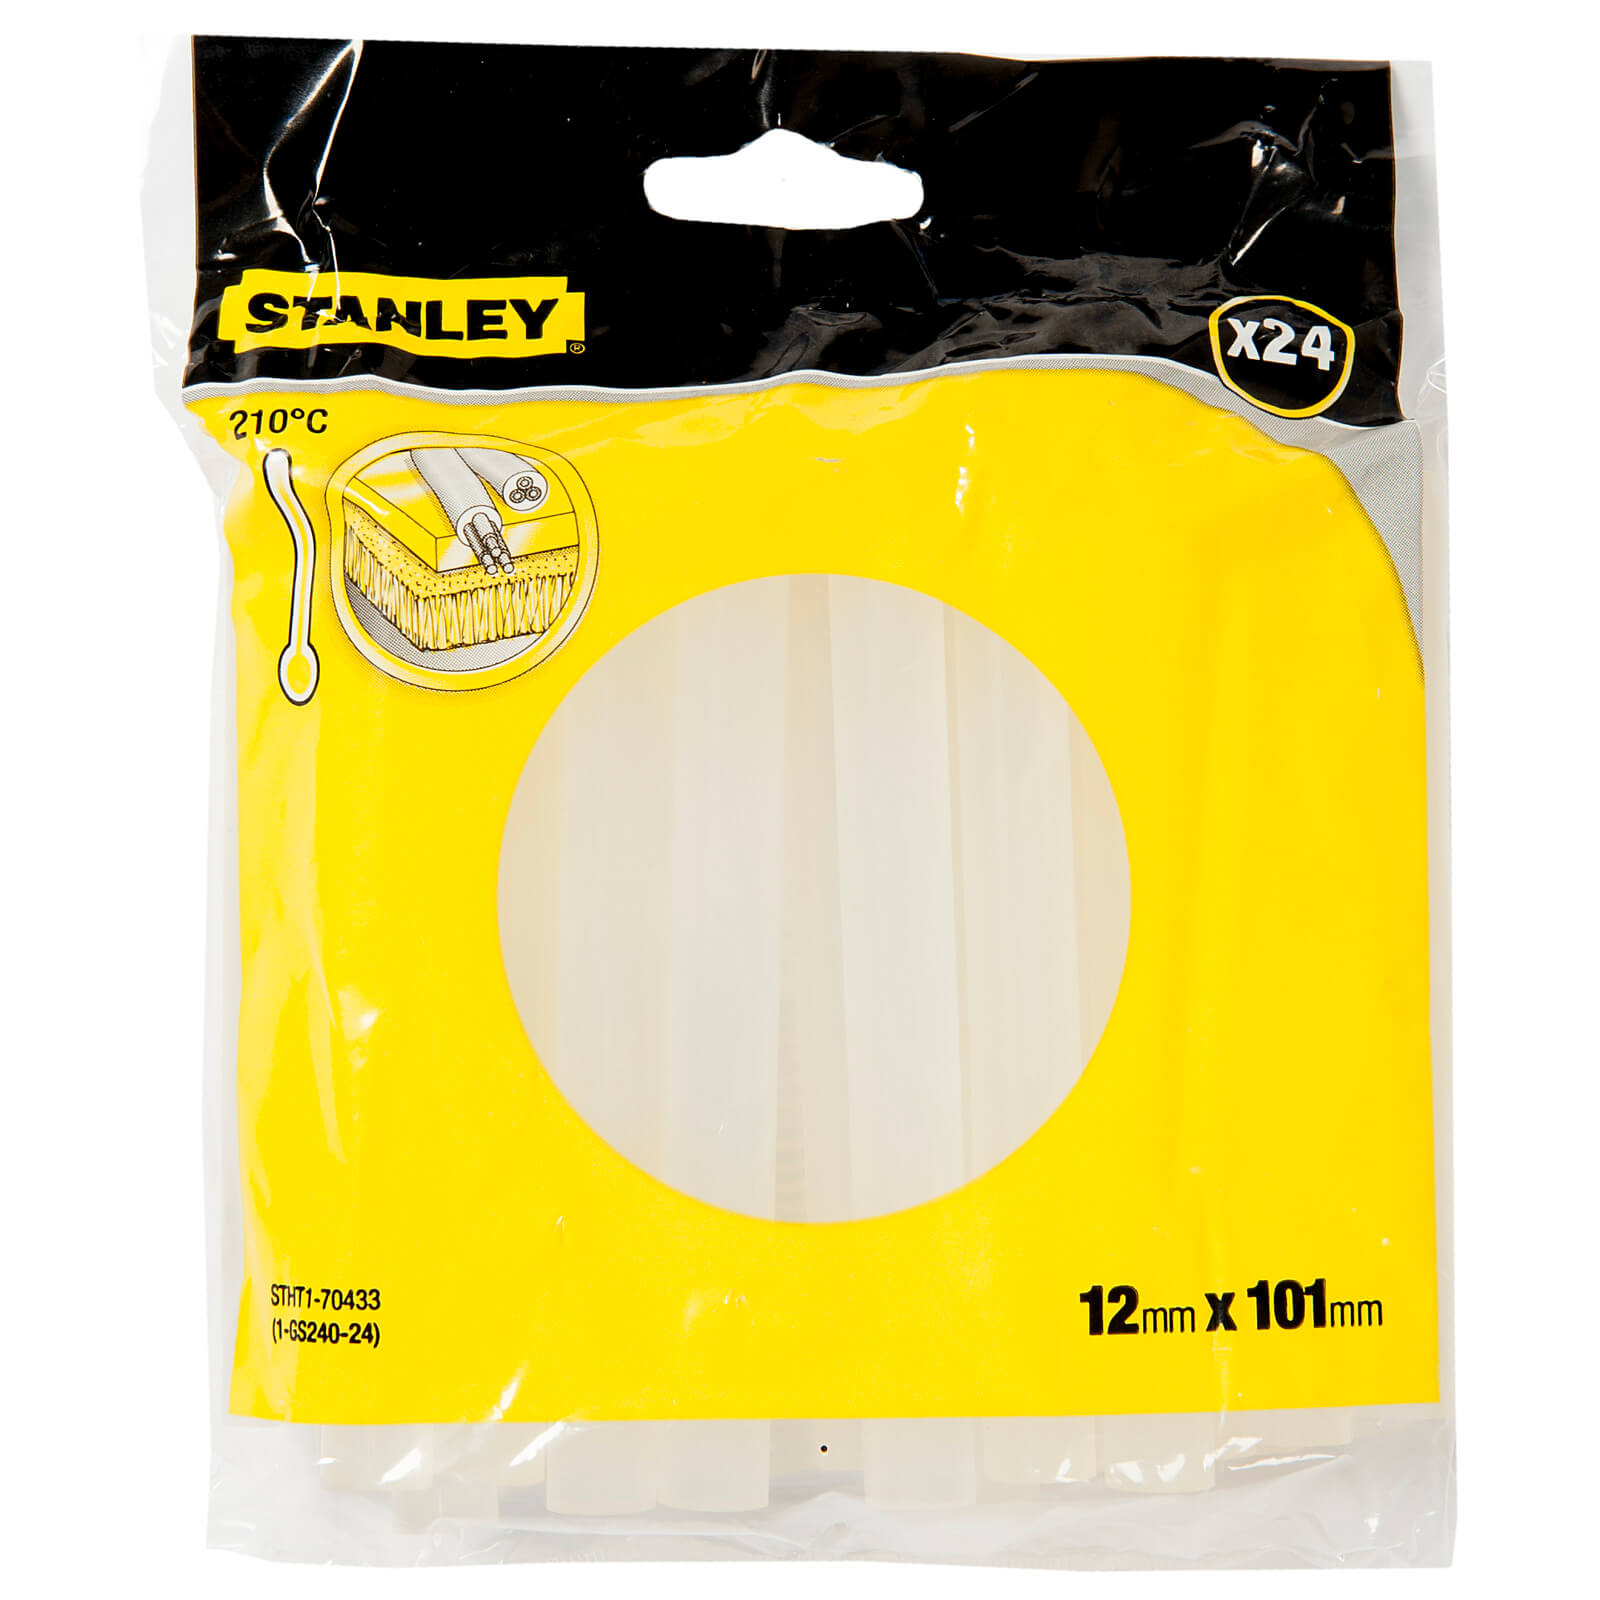 STANLEY General Purpose 12x101 mm Glue Stick – Pack of 24 (STHT1-70433)